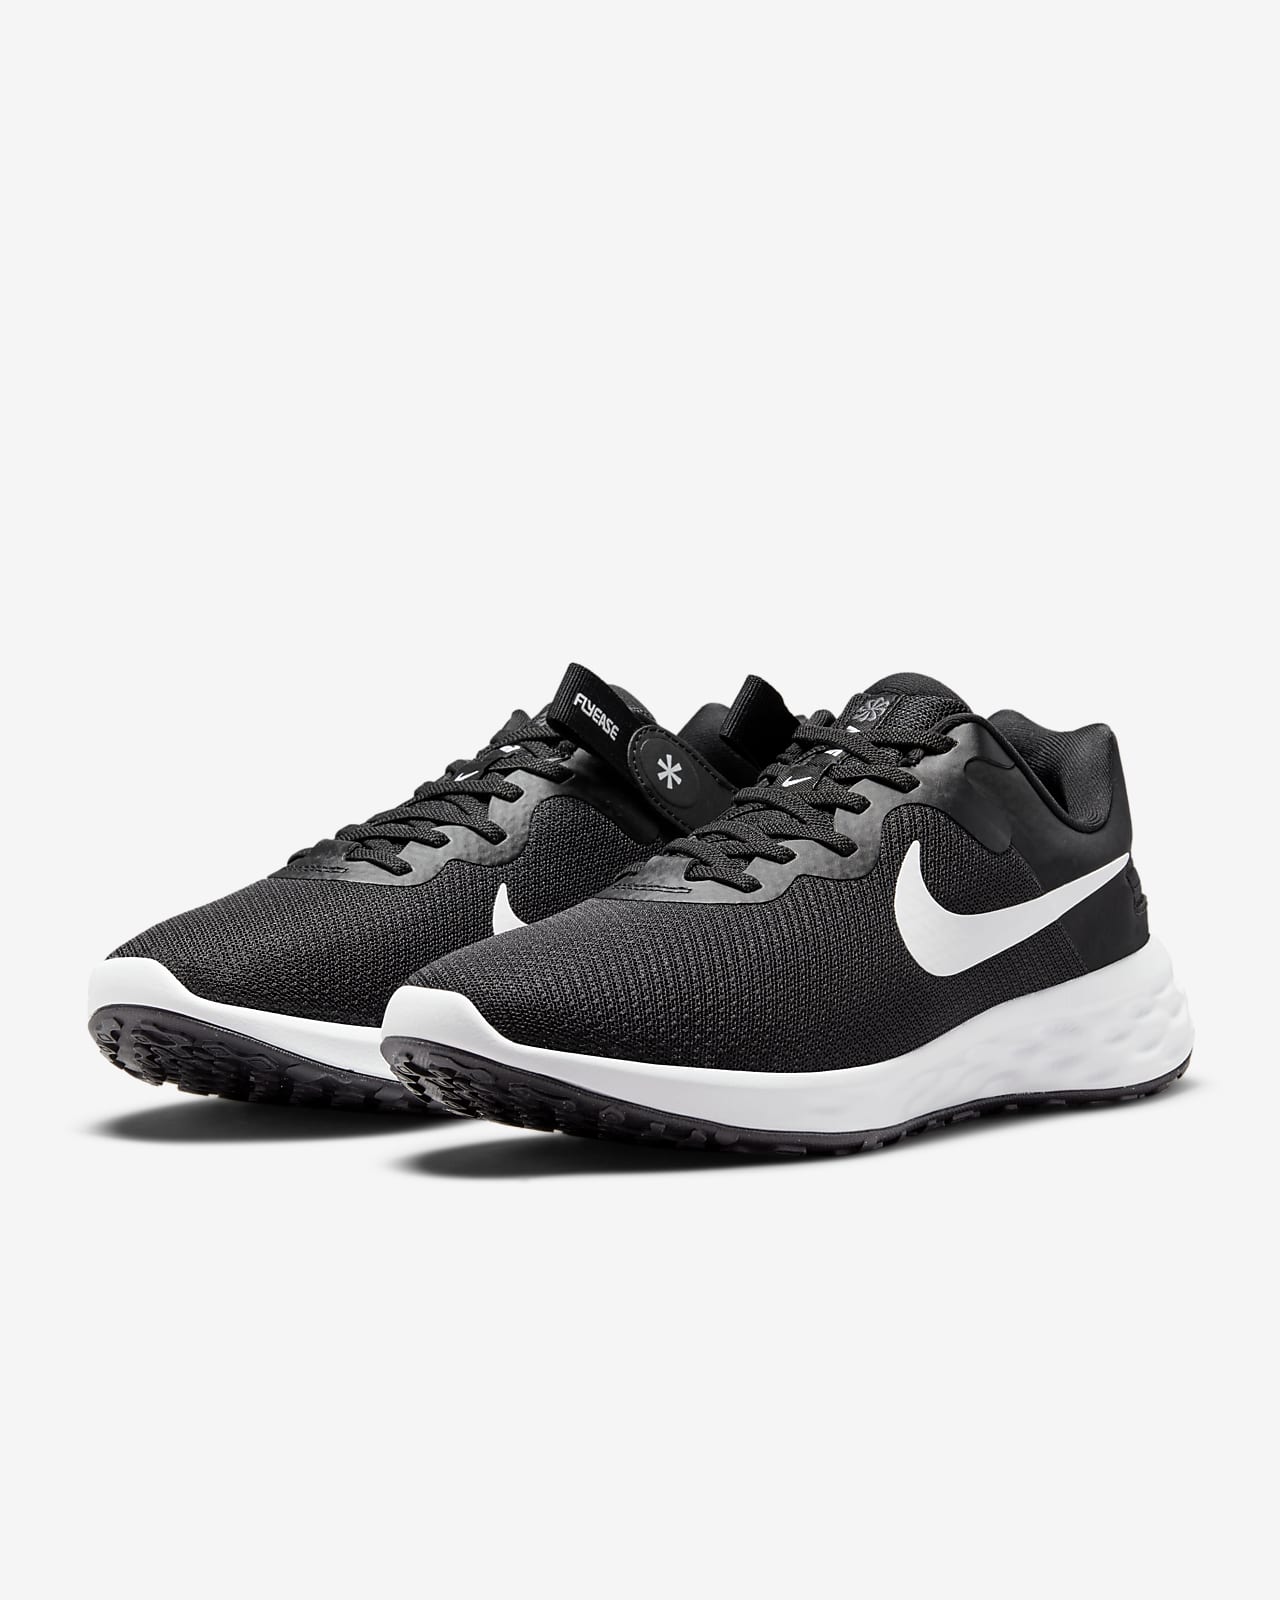 Men\'s Shoes. 6 FlyEase Easy Nike Nike Revolution Road Running On/Off CA